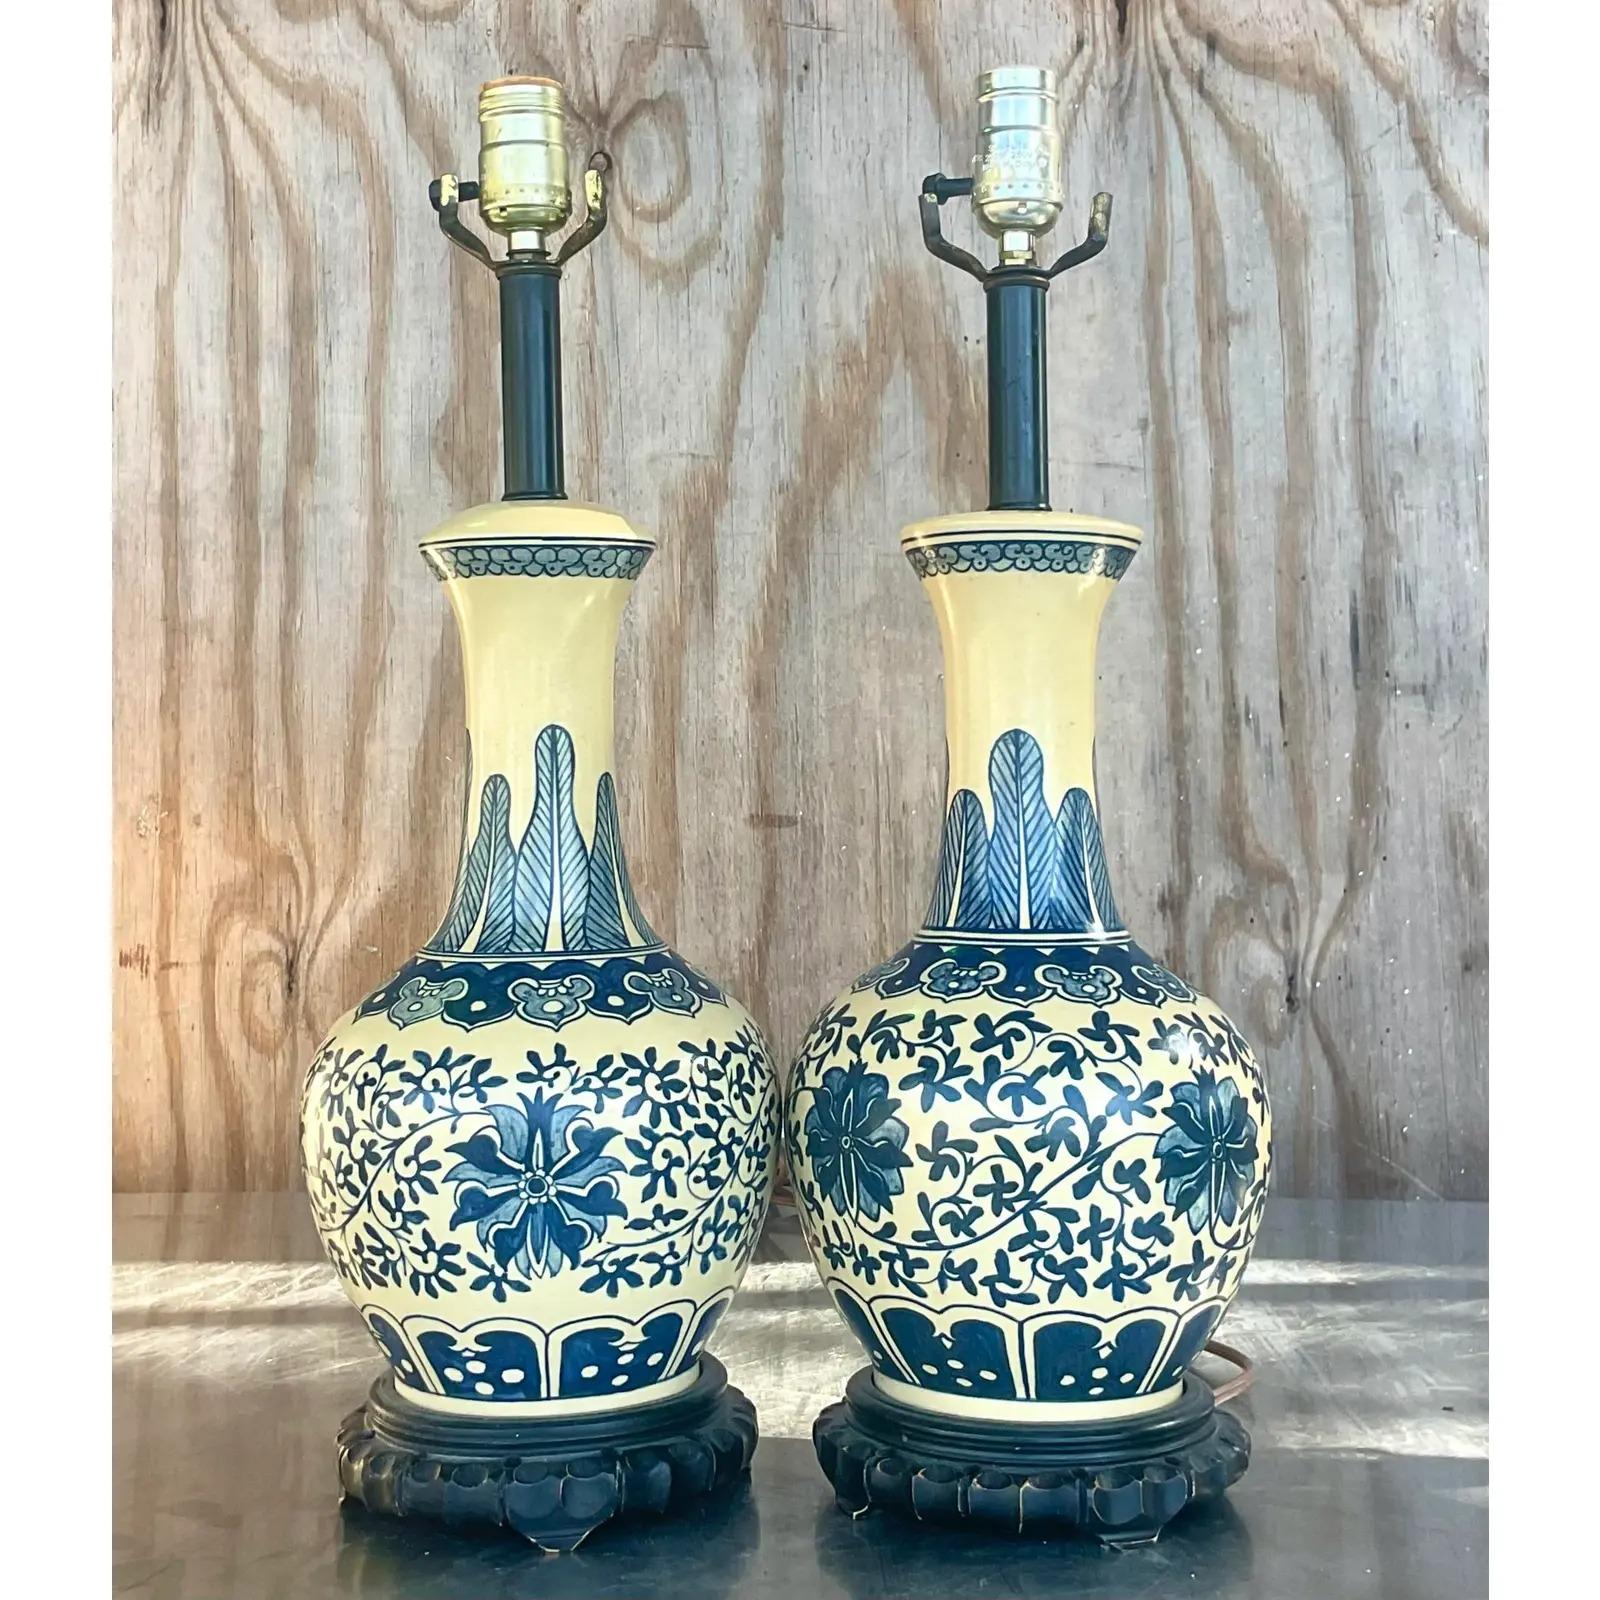 20th Century Vintage Boho Chic Hand Painted Gourd Lamps - a Pair For Sale